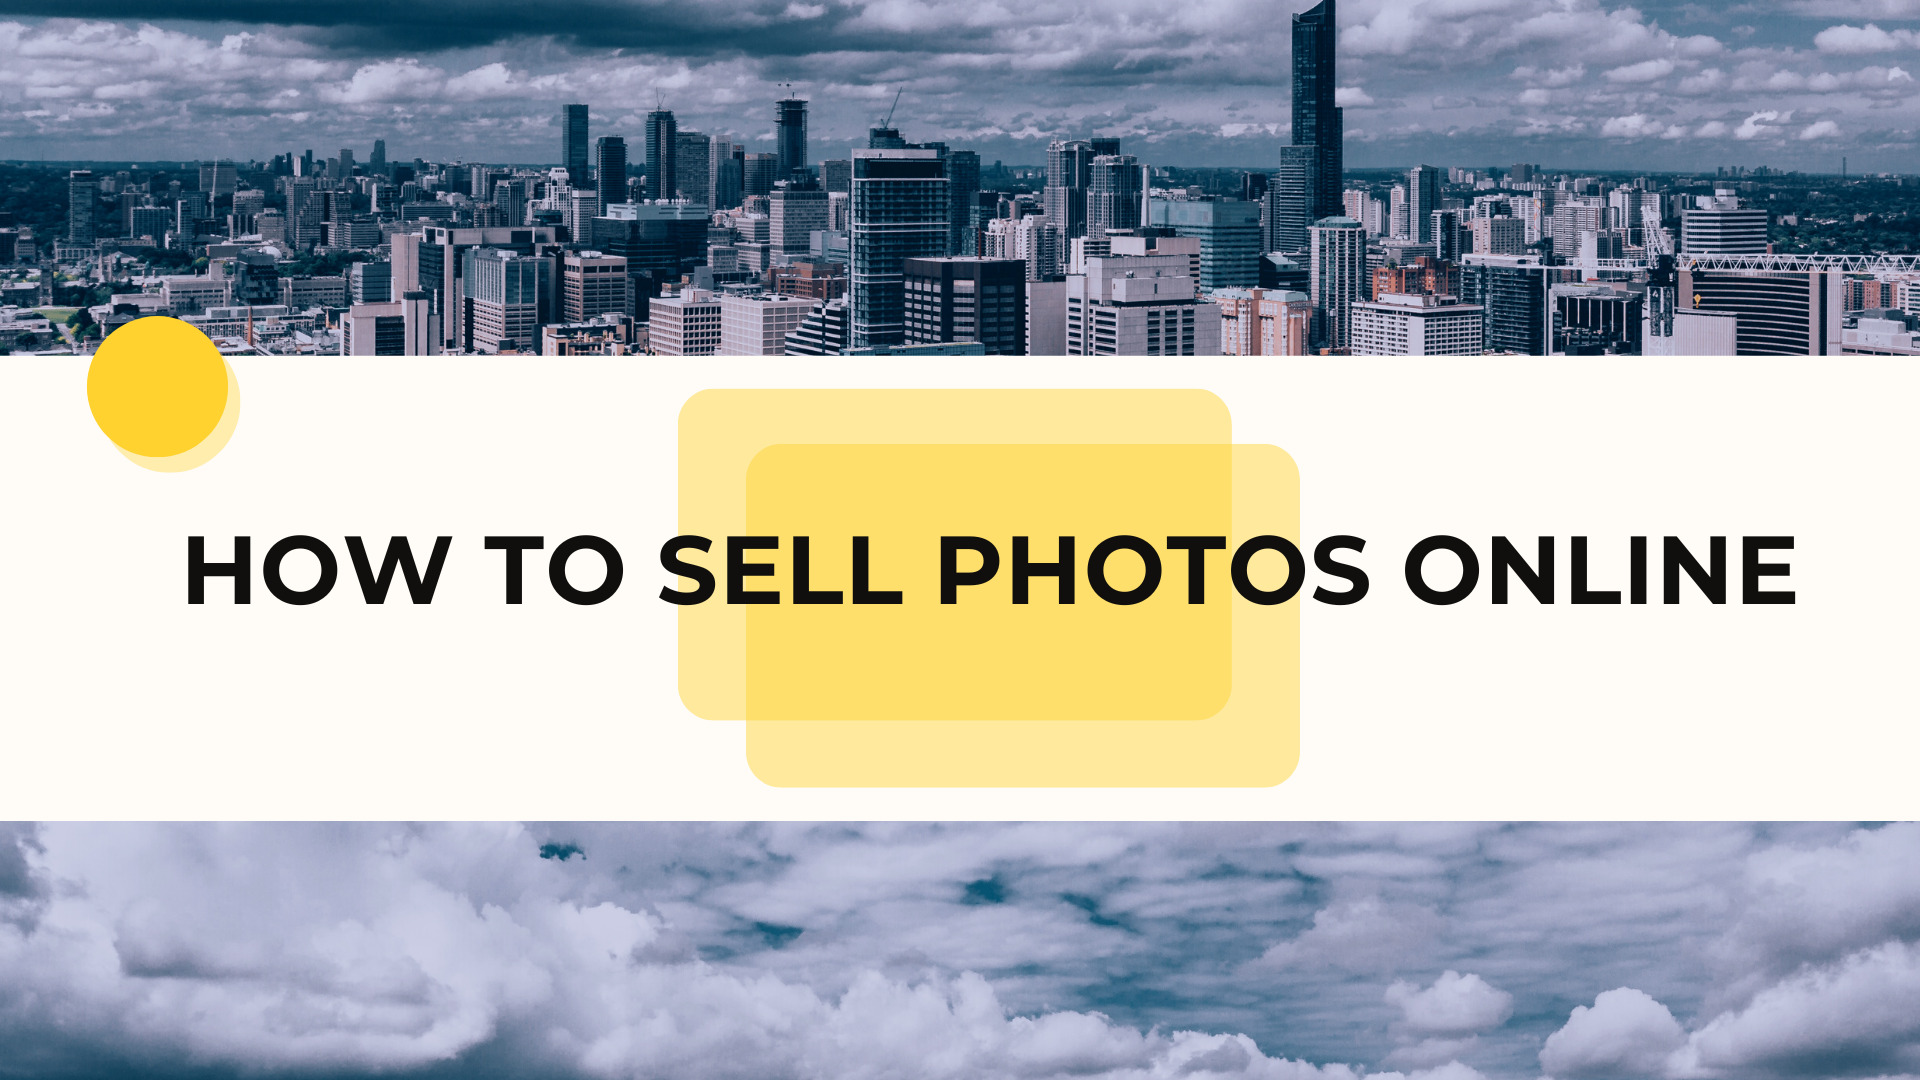 How To Sell Photos Online